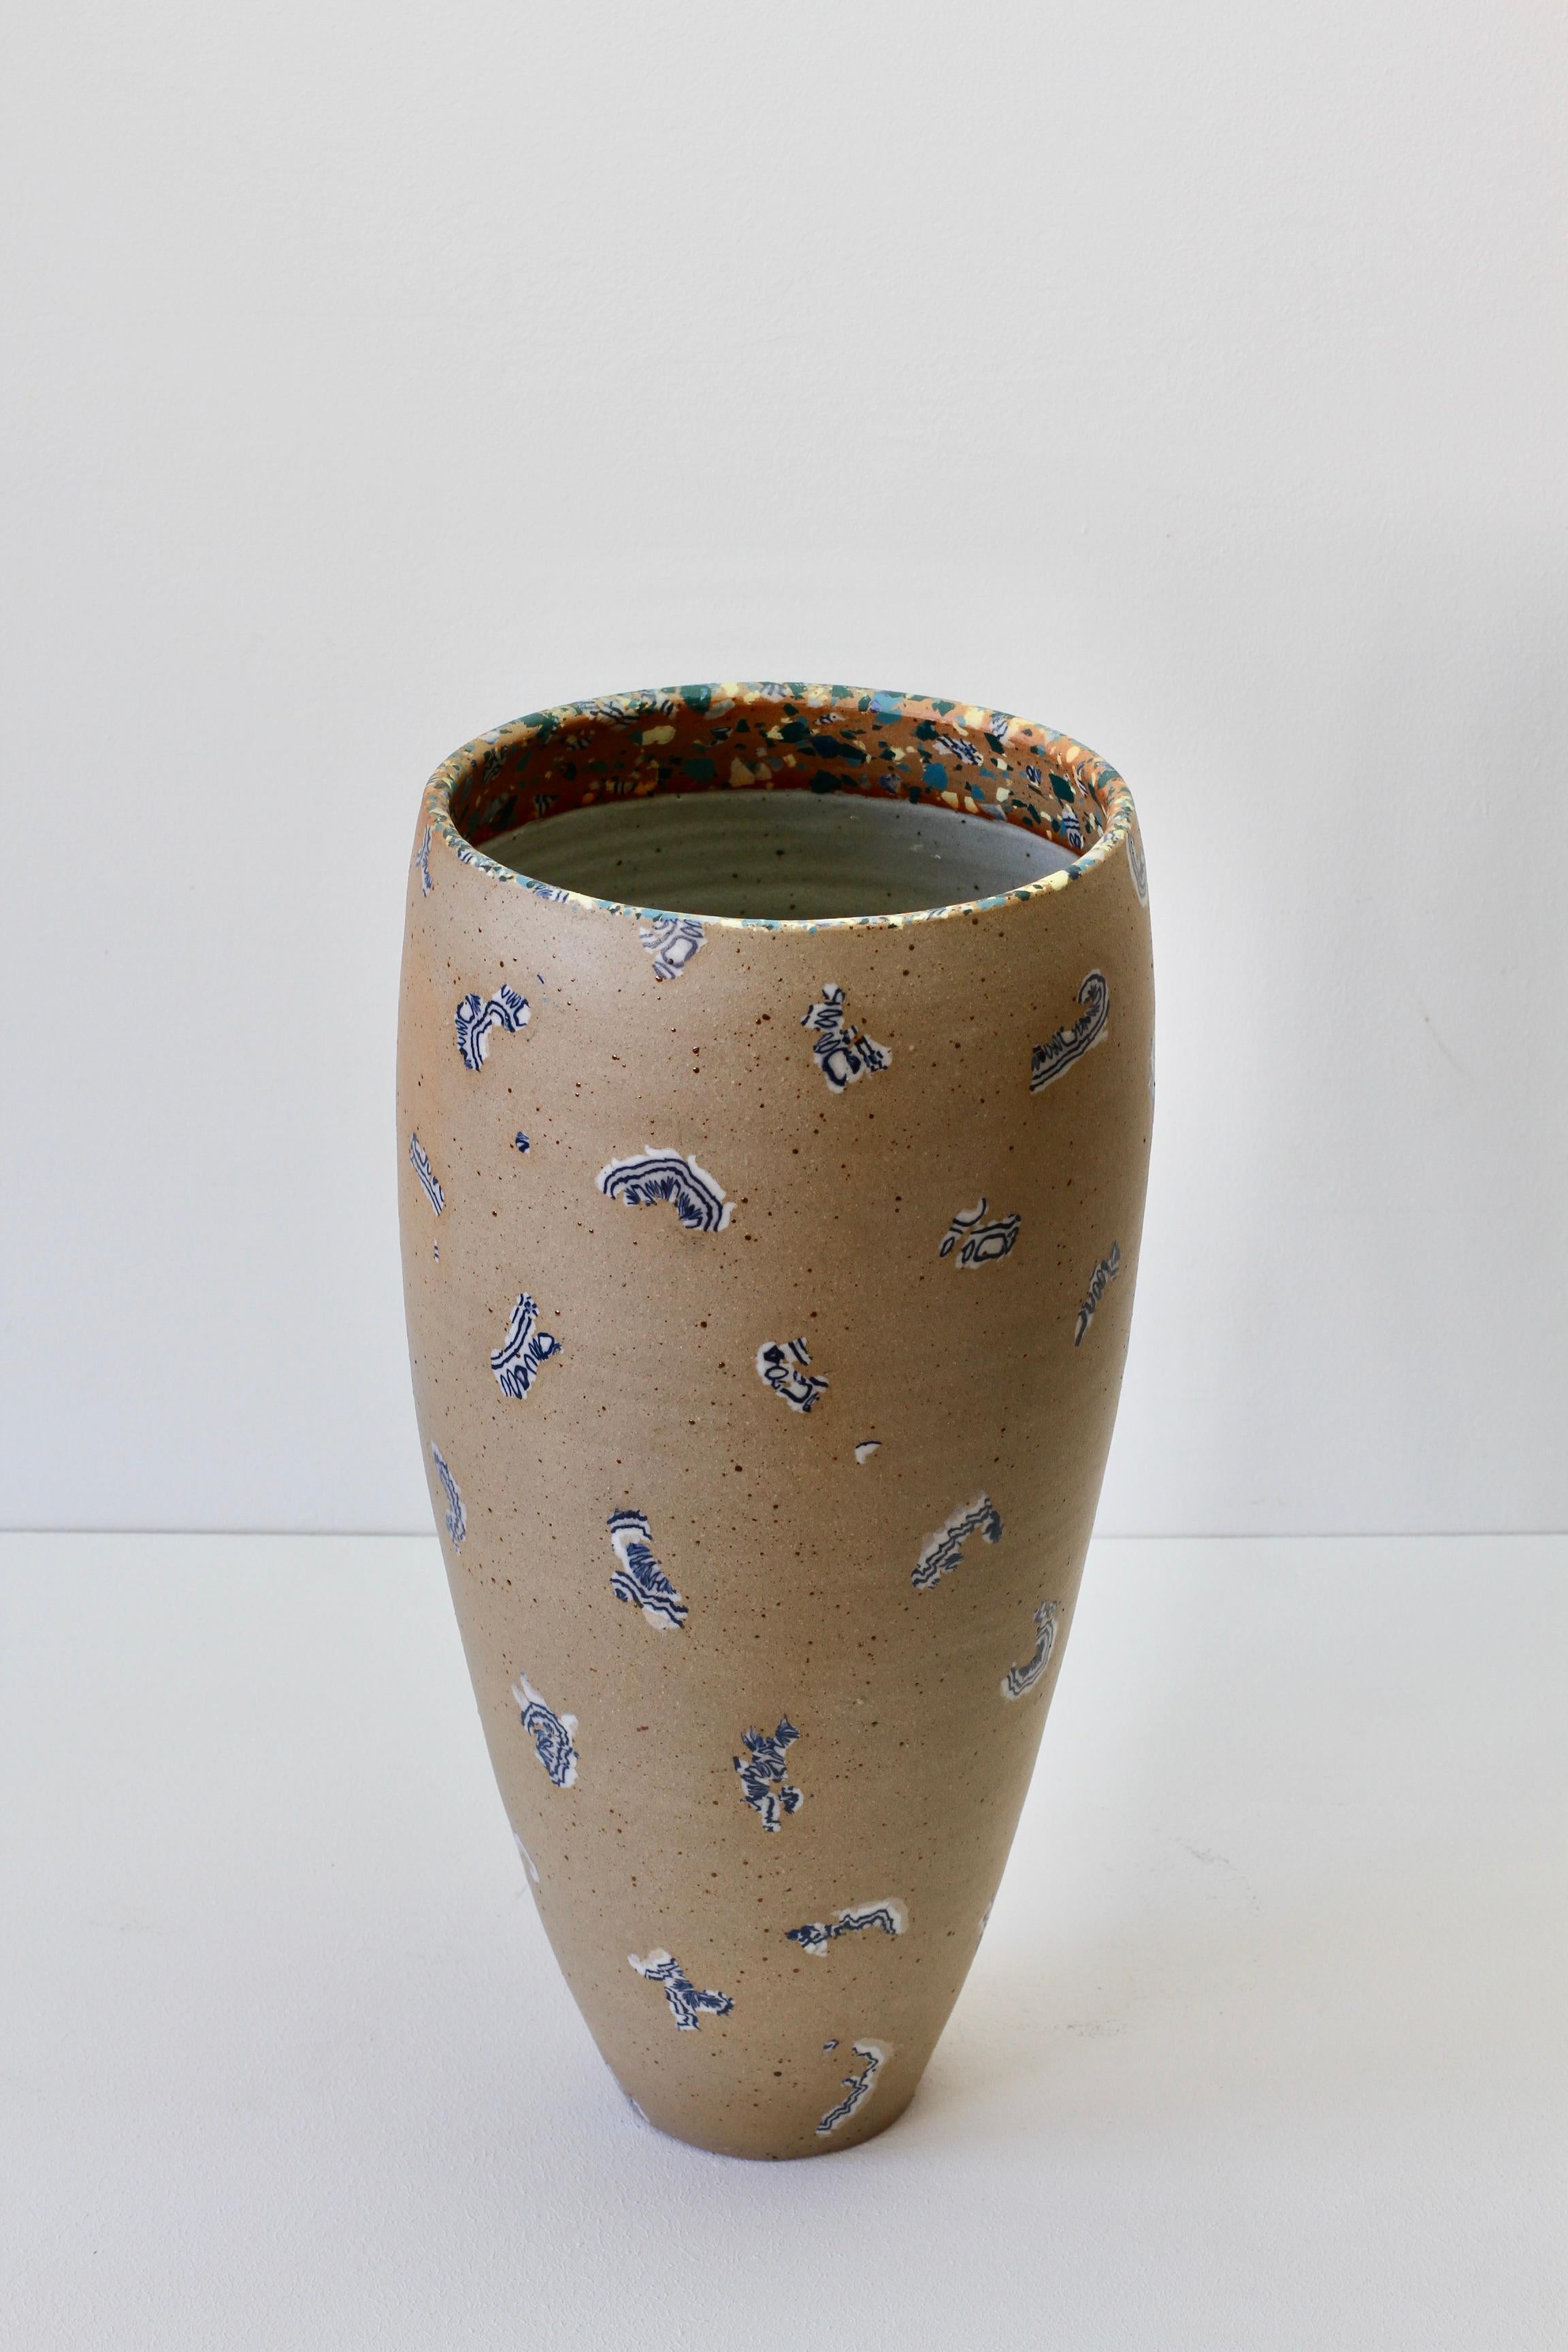 Wonderful unique tall stoneware vase by German artist Sabine Mooshammer, circa 1992. This piece of art Studio Pottery is really rather exquisite with the beautiful blue and white 'mosaic' inclusions throughout the main body of the vase together with